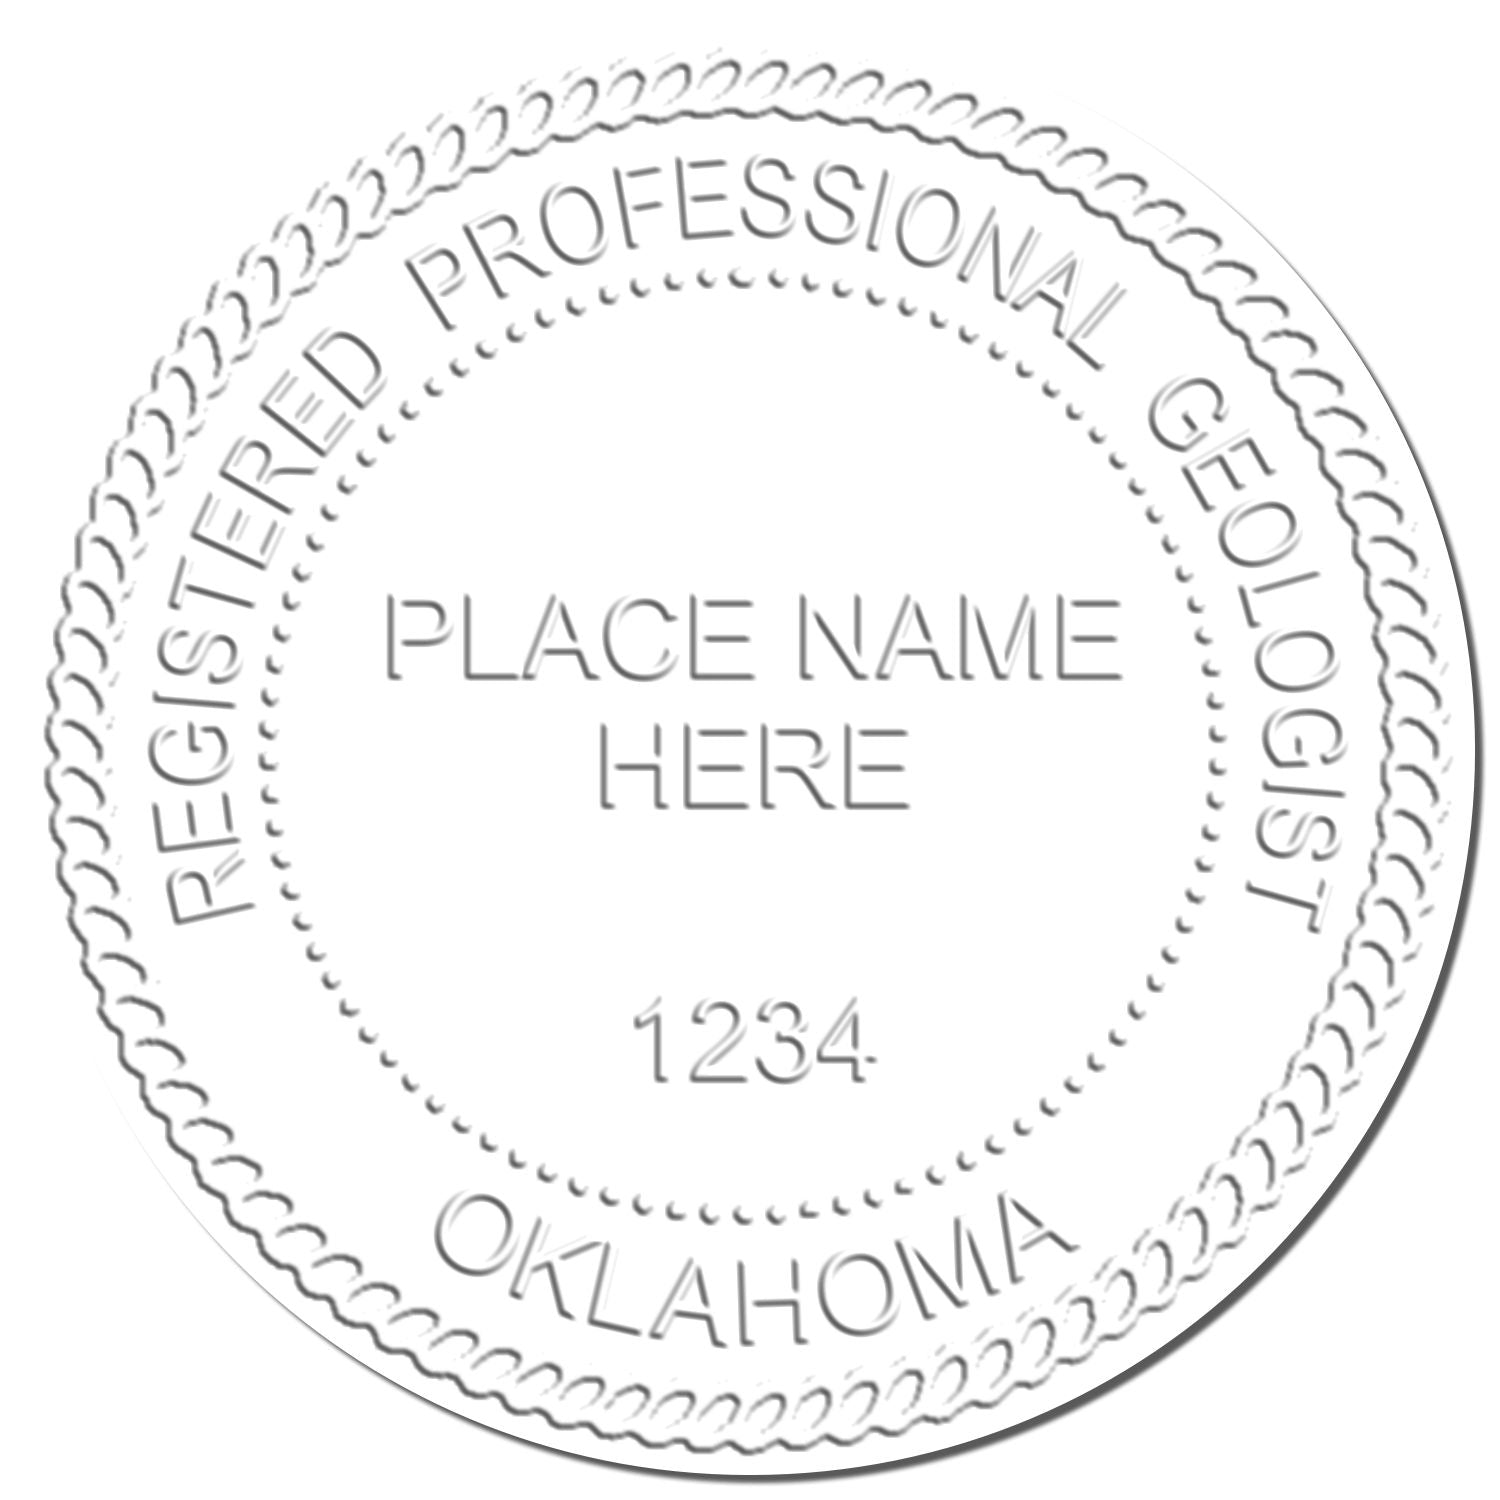 The main image for the Oklahoma Geologist Desk Seal depicting a sample of the imprint and imprint sample